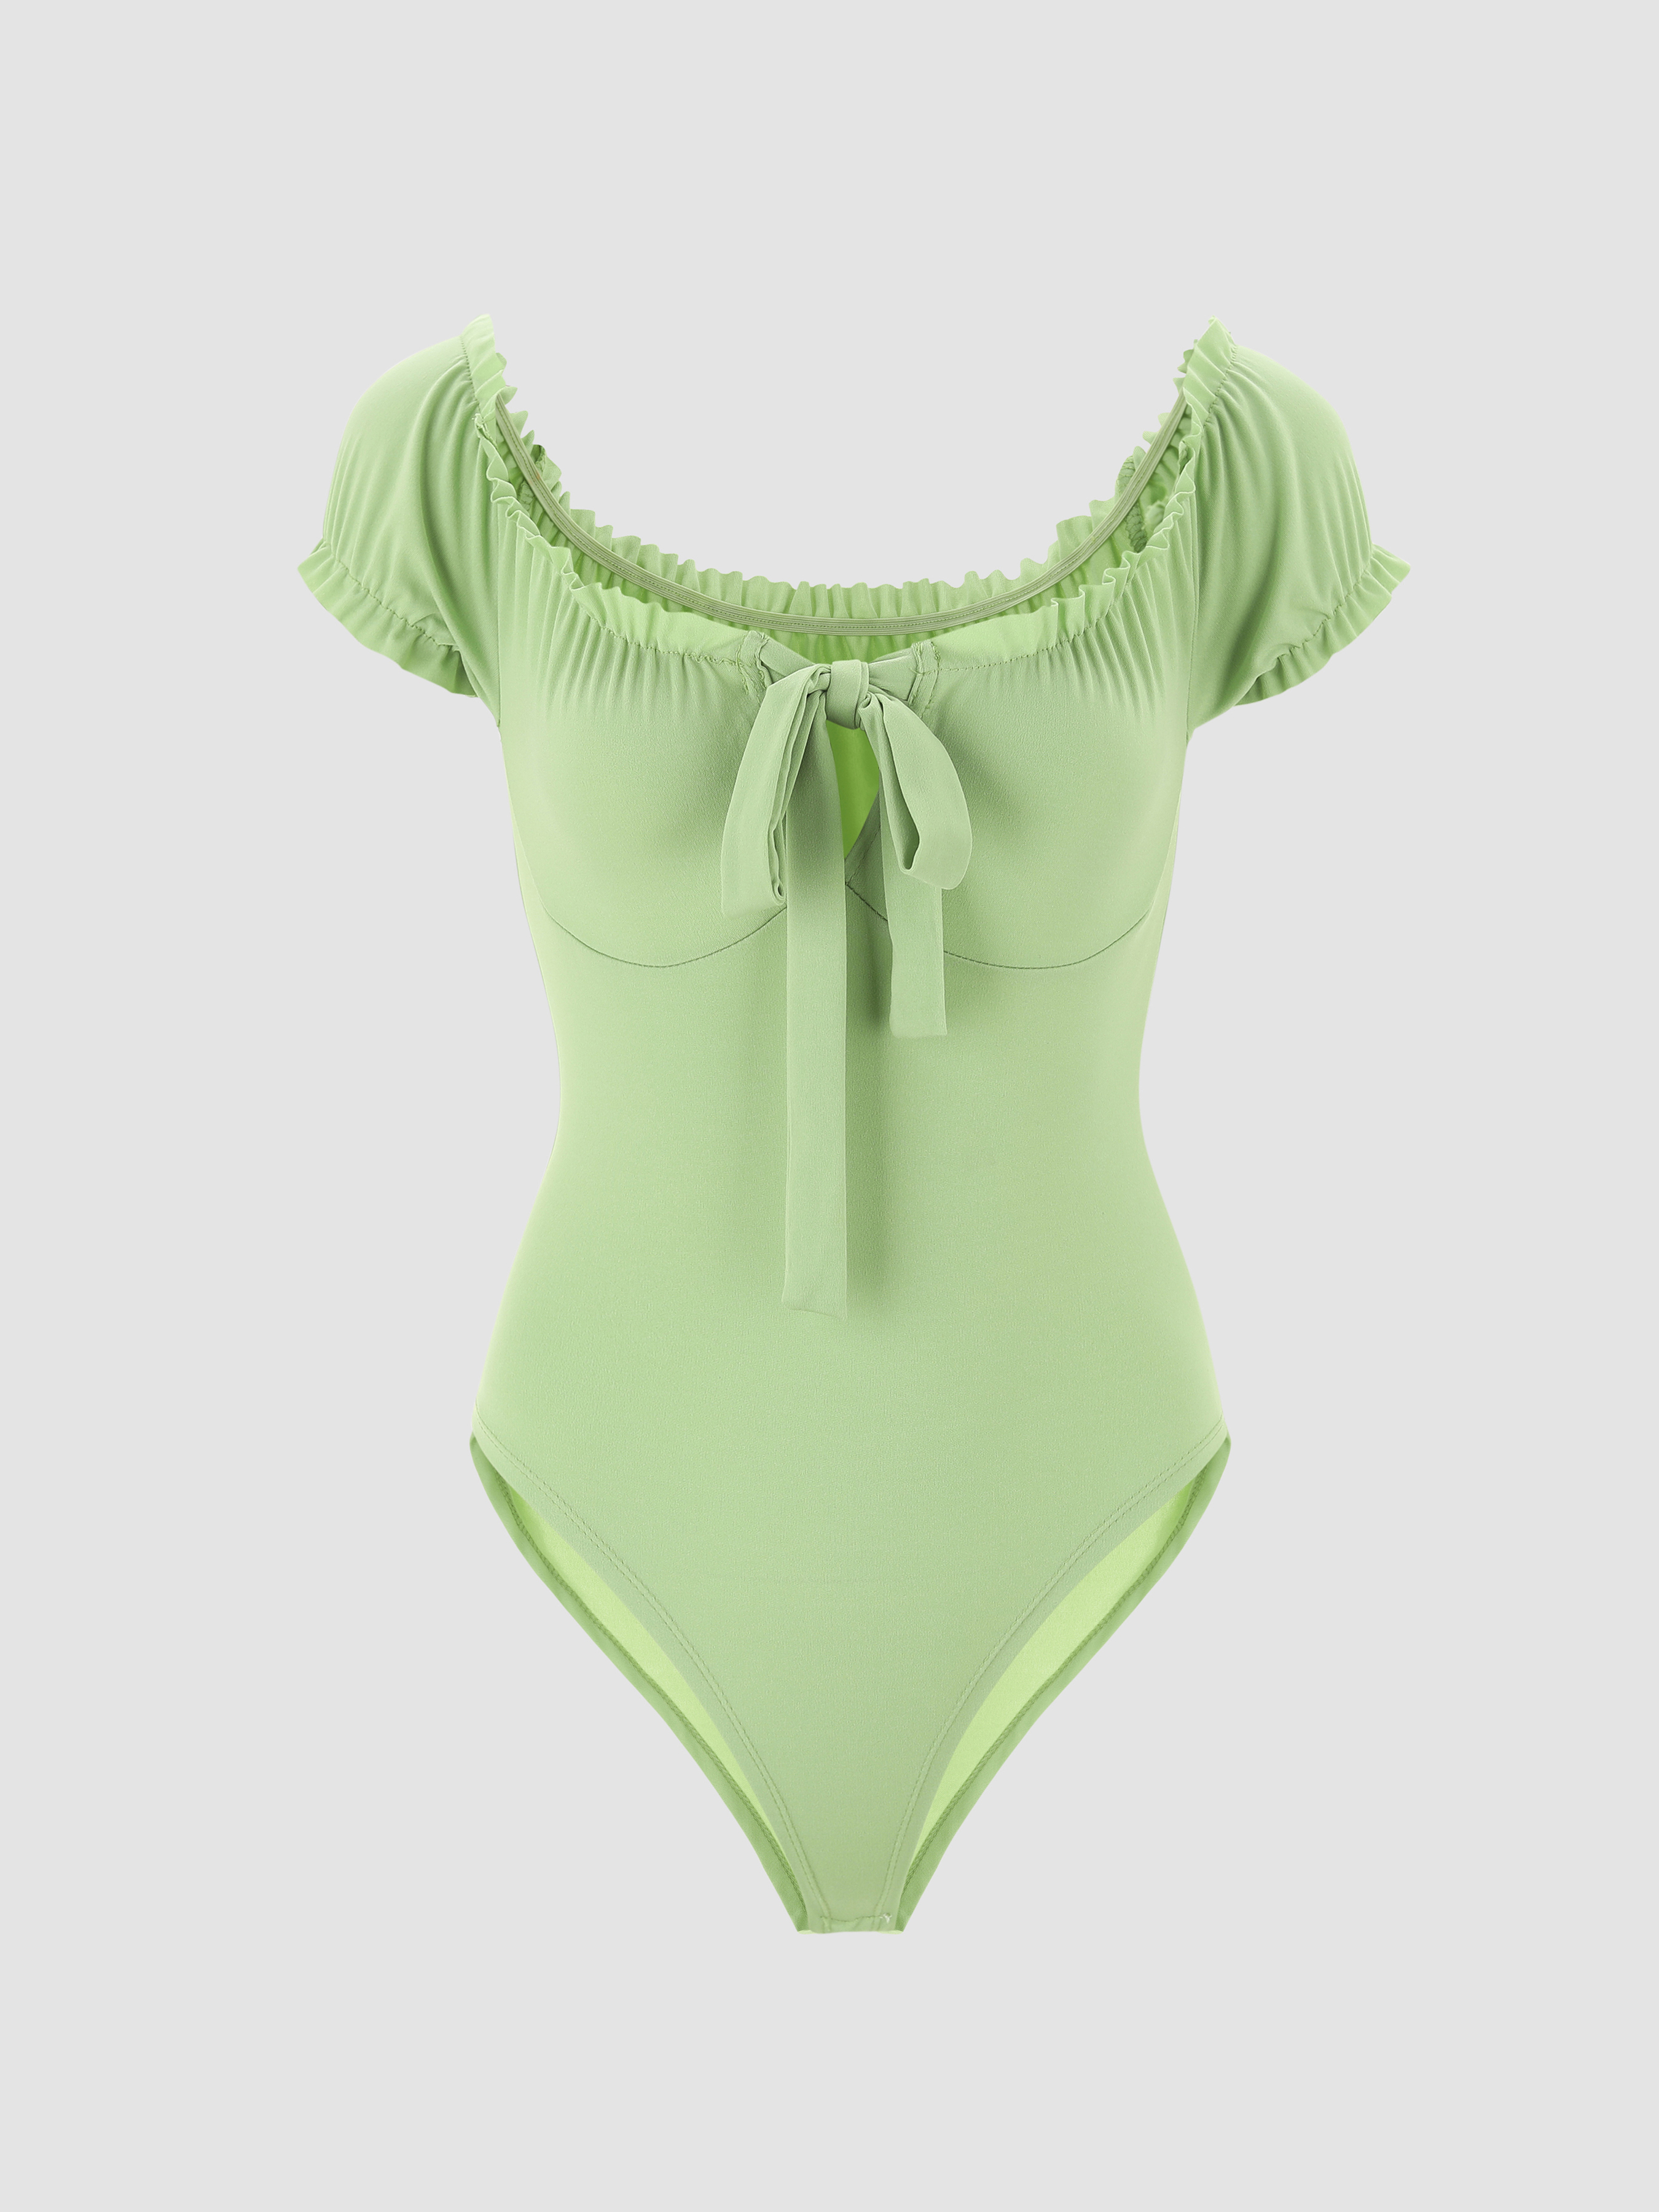 TULLE PRINT BODYSUIT WITH RUFFLES - Greens